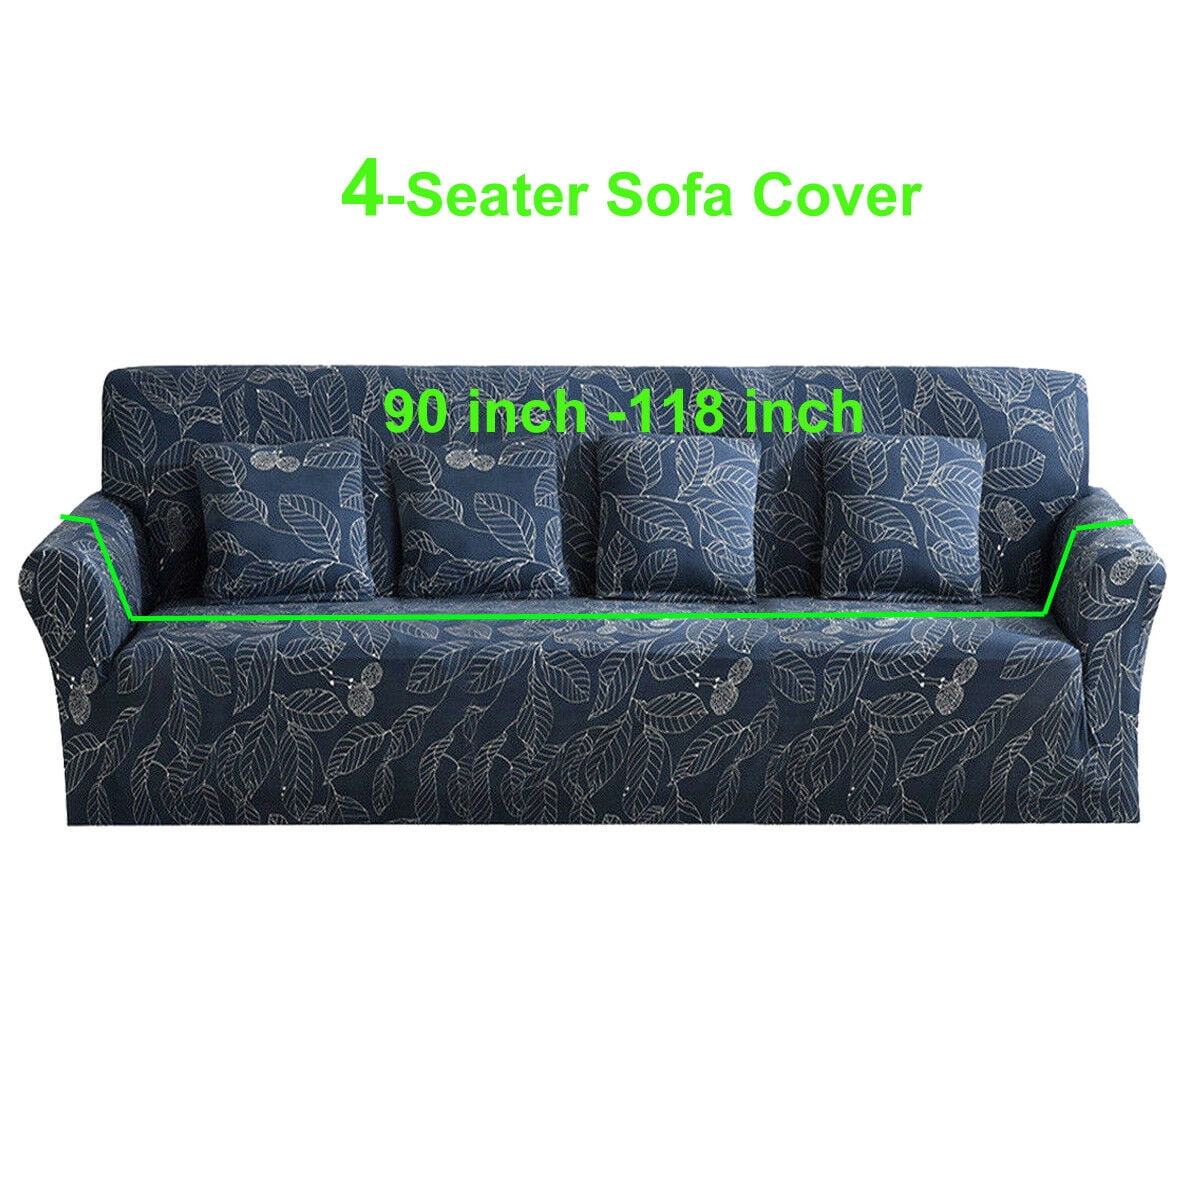 Details about   Universal 1/2/3/4 Seater Sofa Cover Couch Towel Full Cover Slipcover Home Decor 